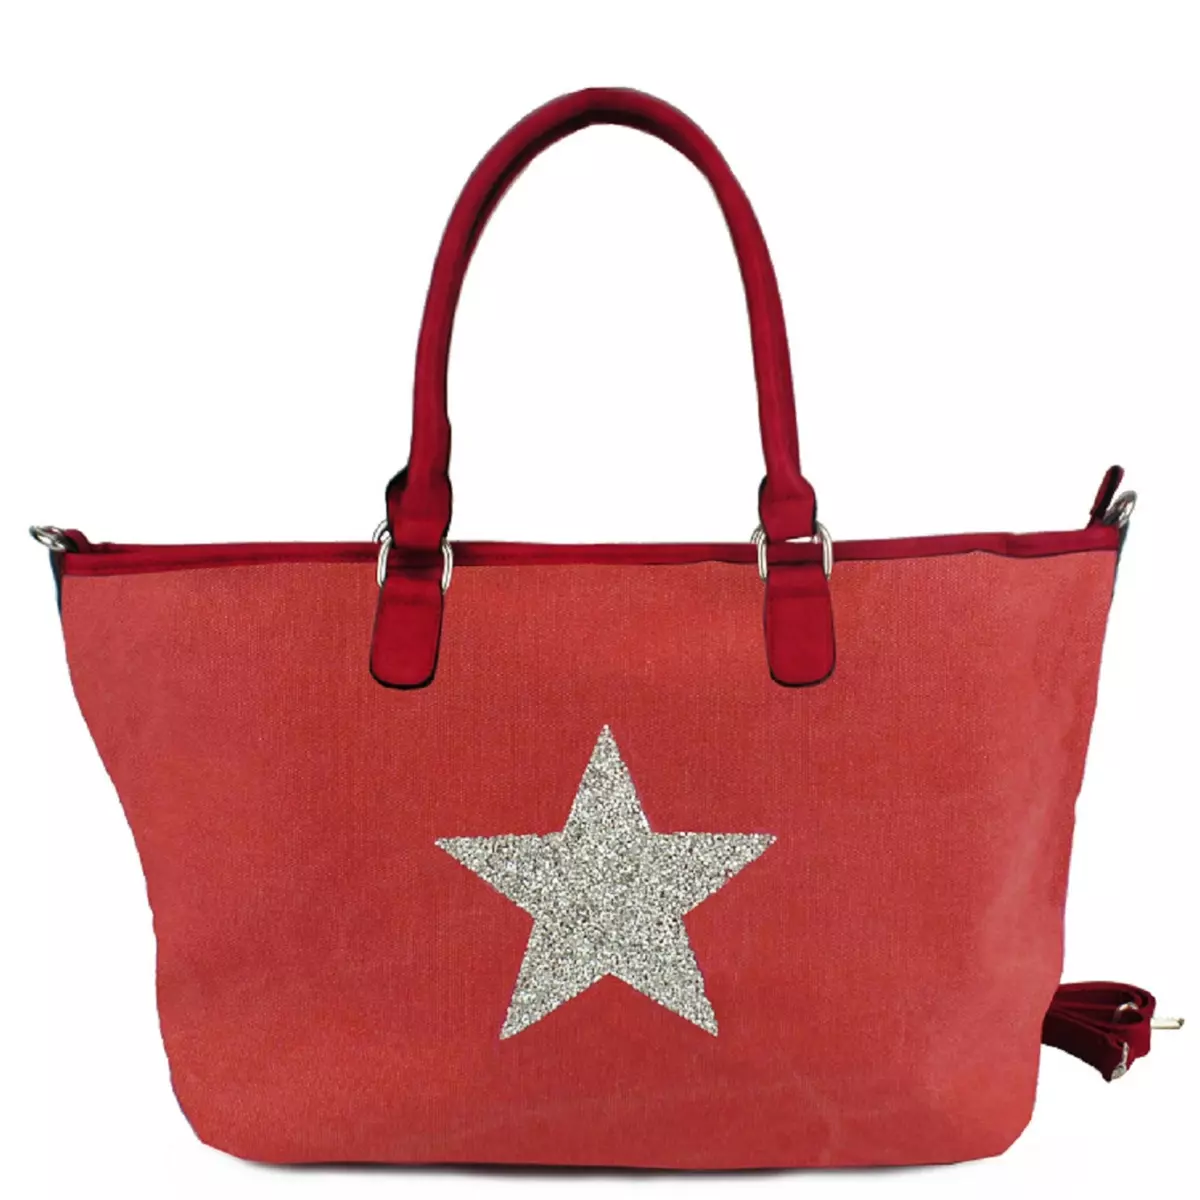 Sac besace strass Etoile - Rouge